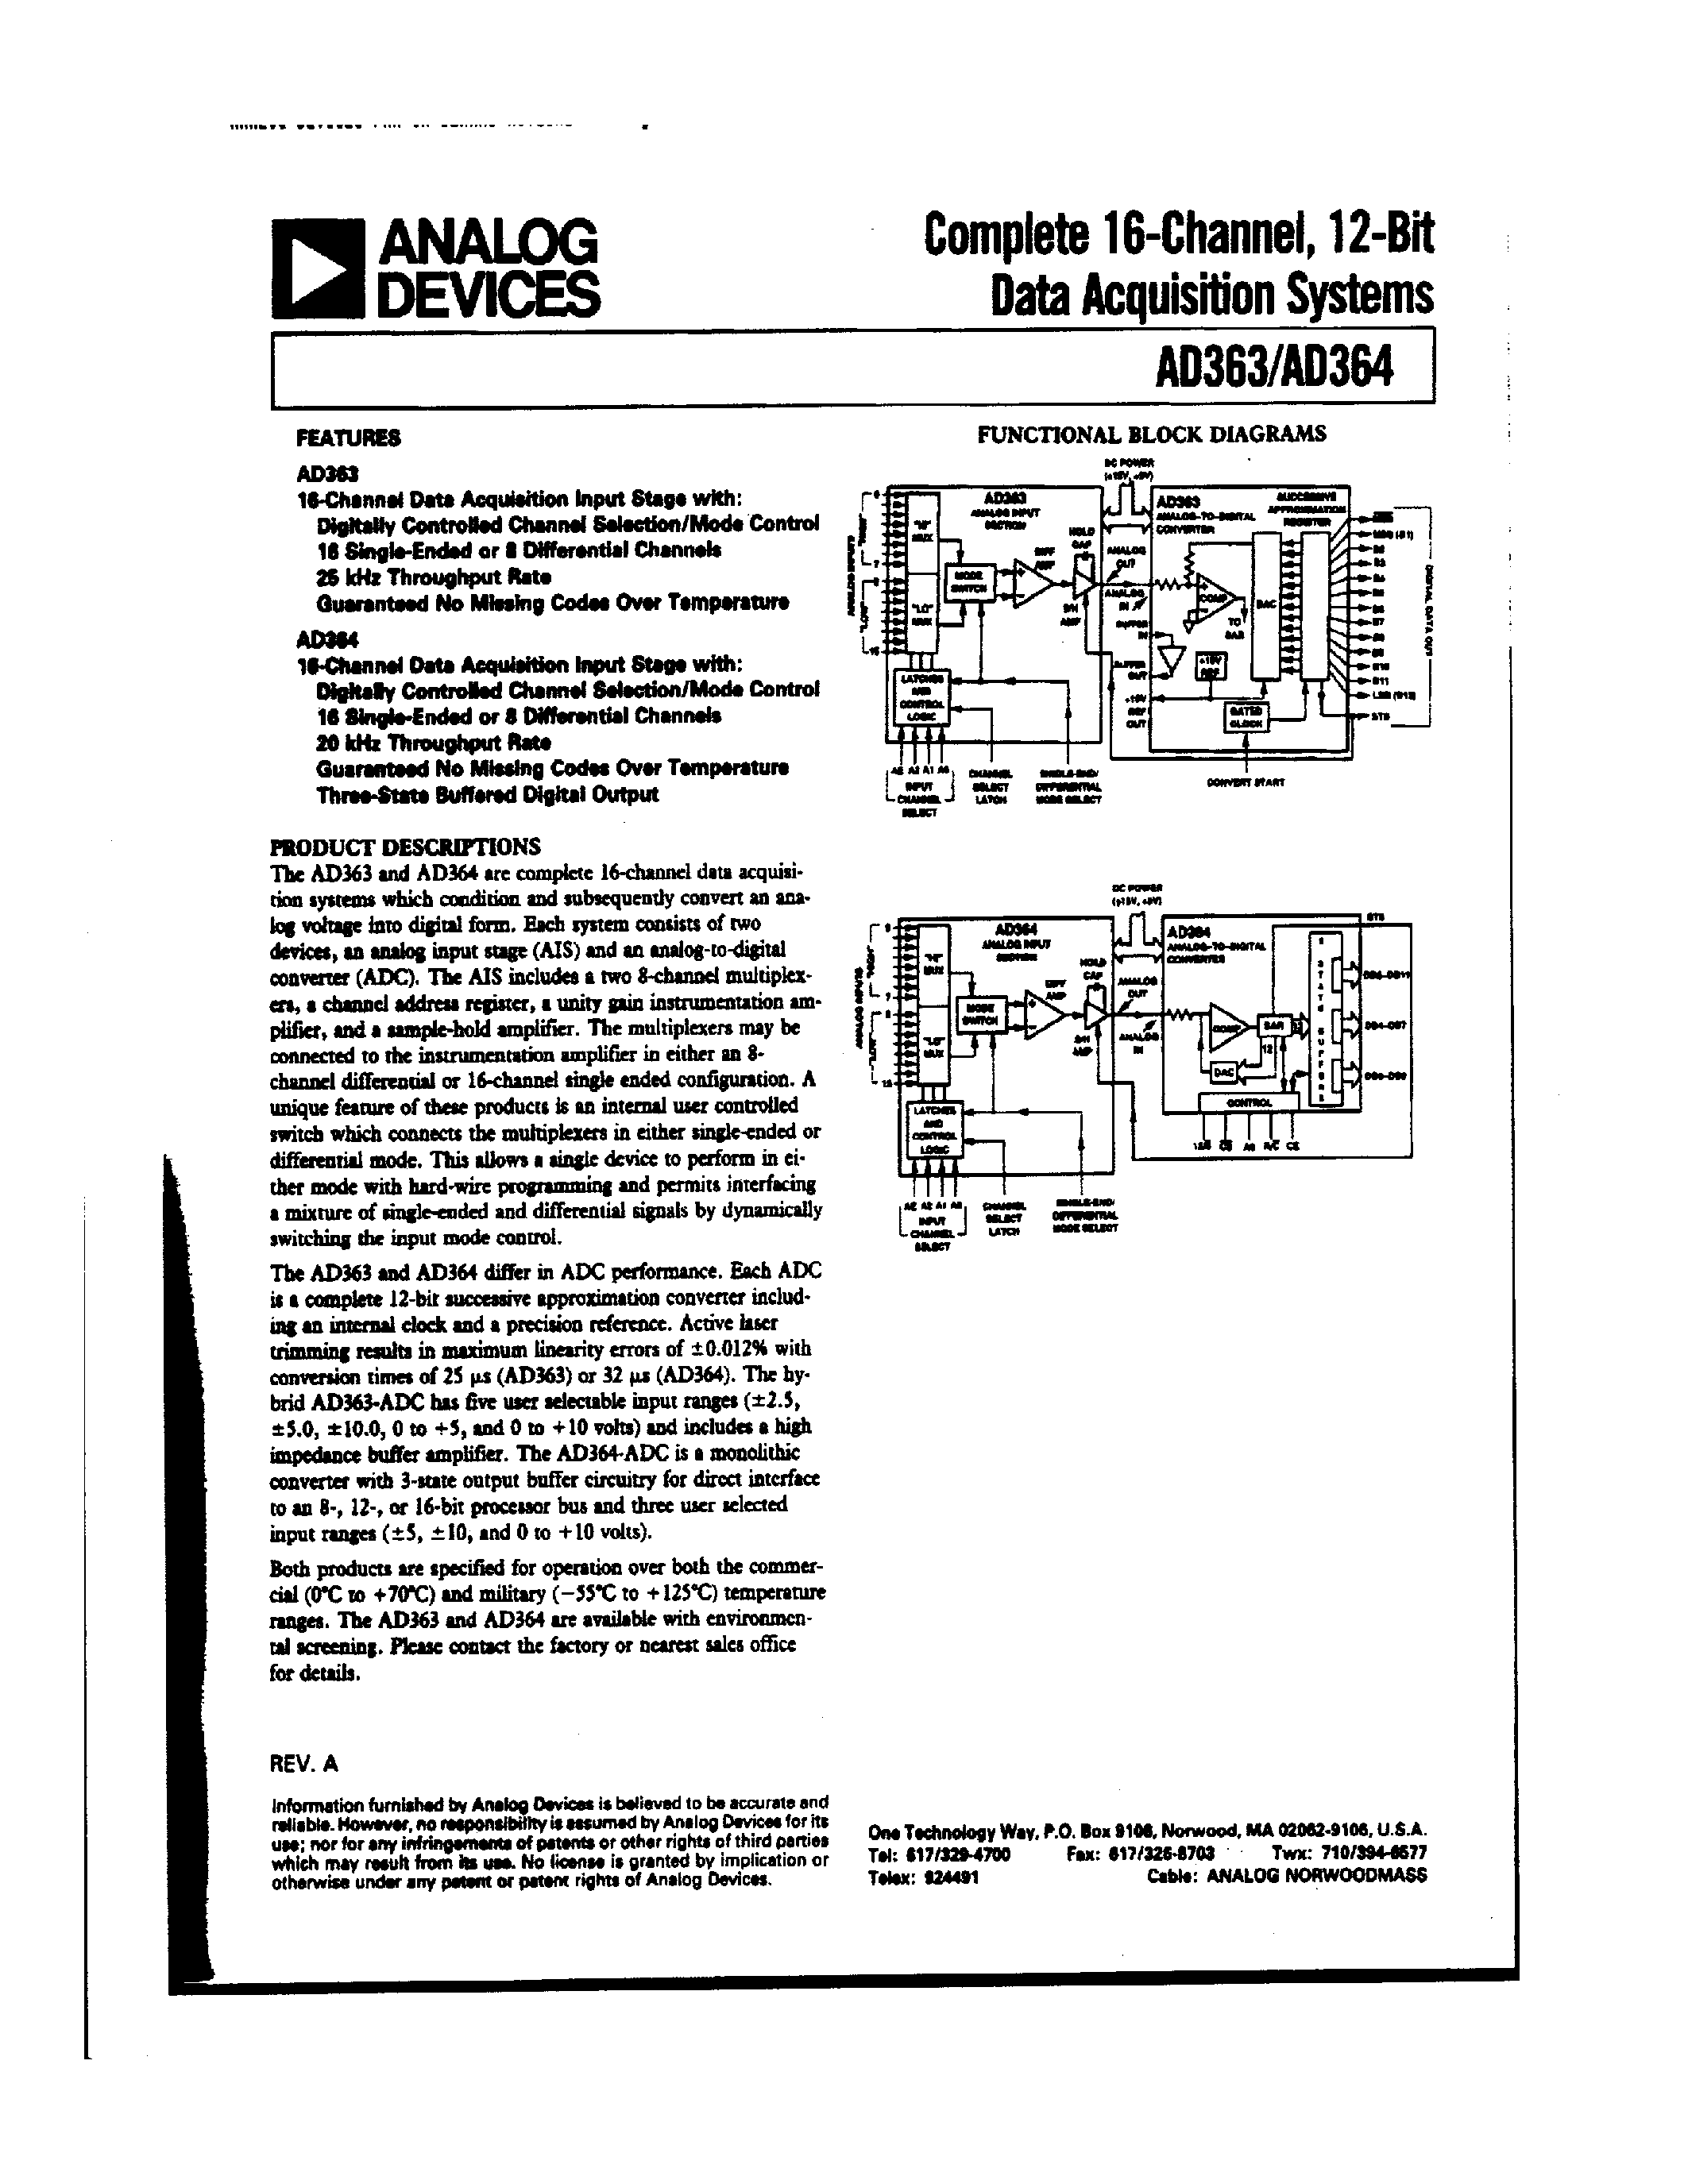 Datasheet AD364RT - Complete 16-Channel/12-Bit Data Acquisition System page 1